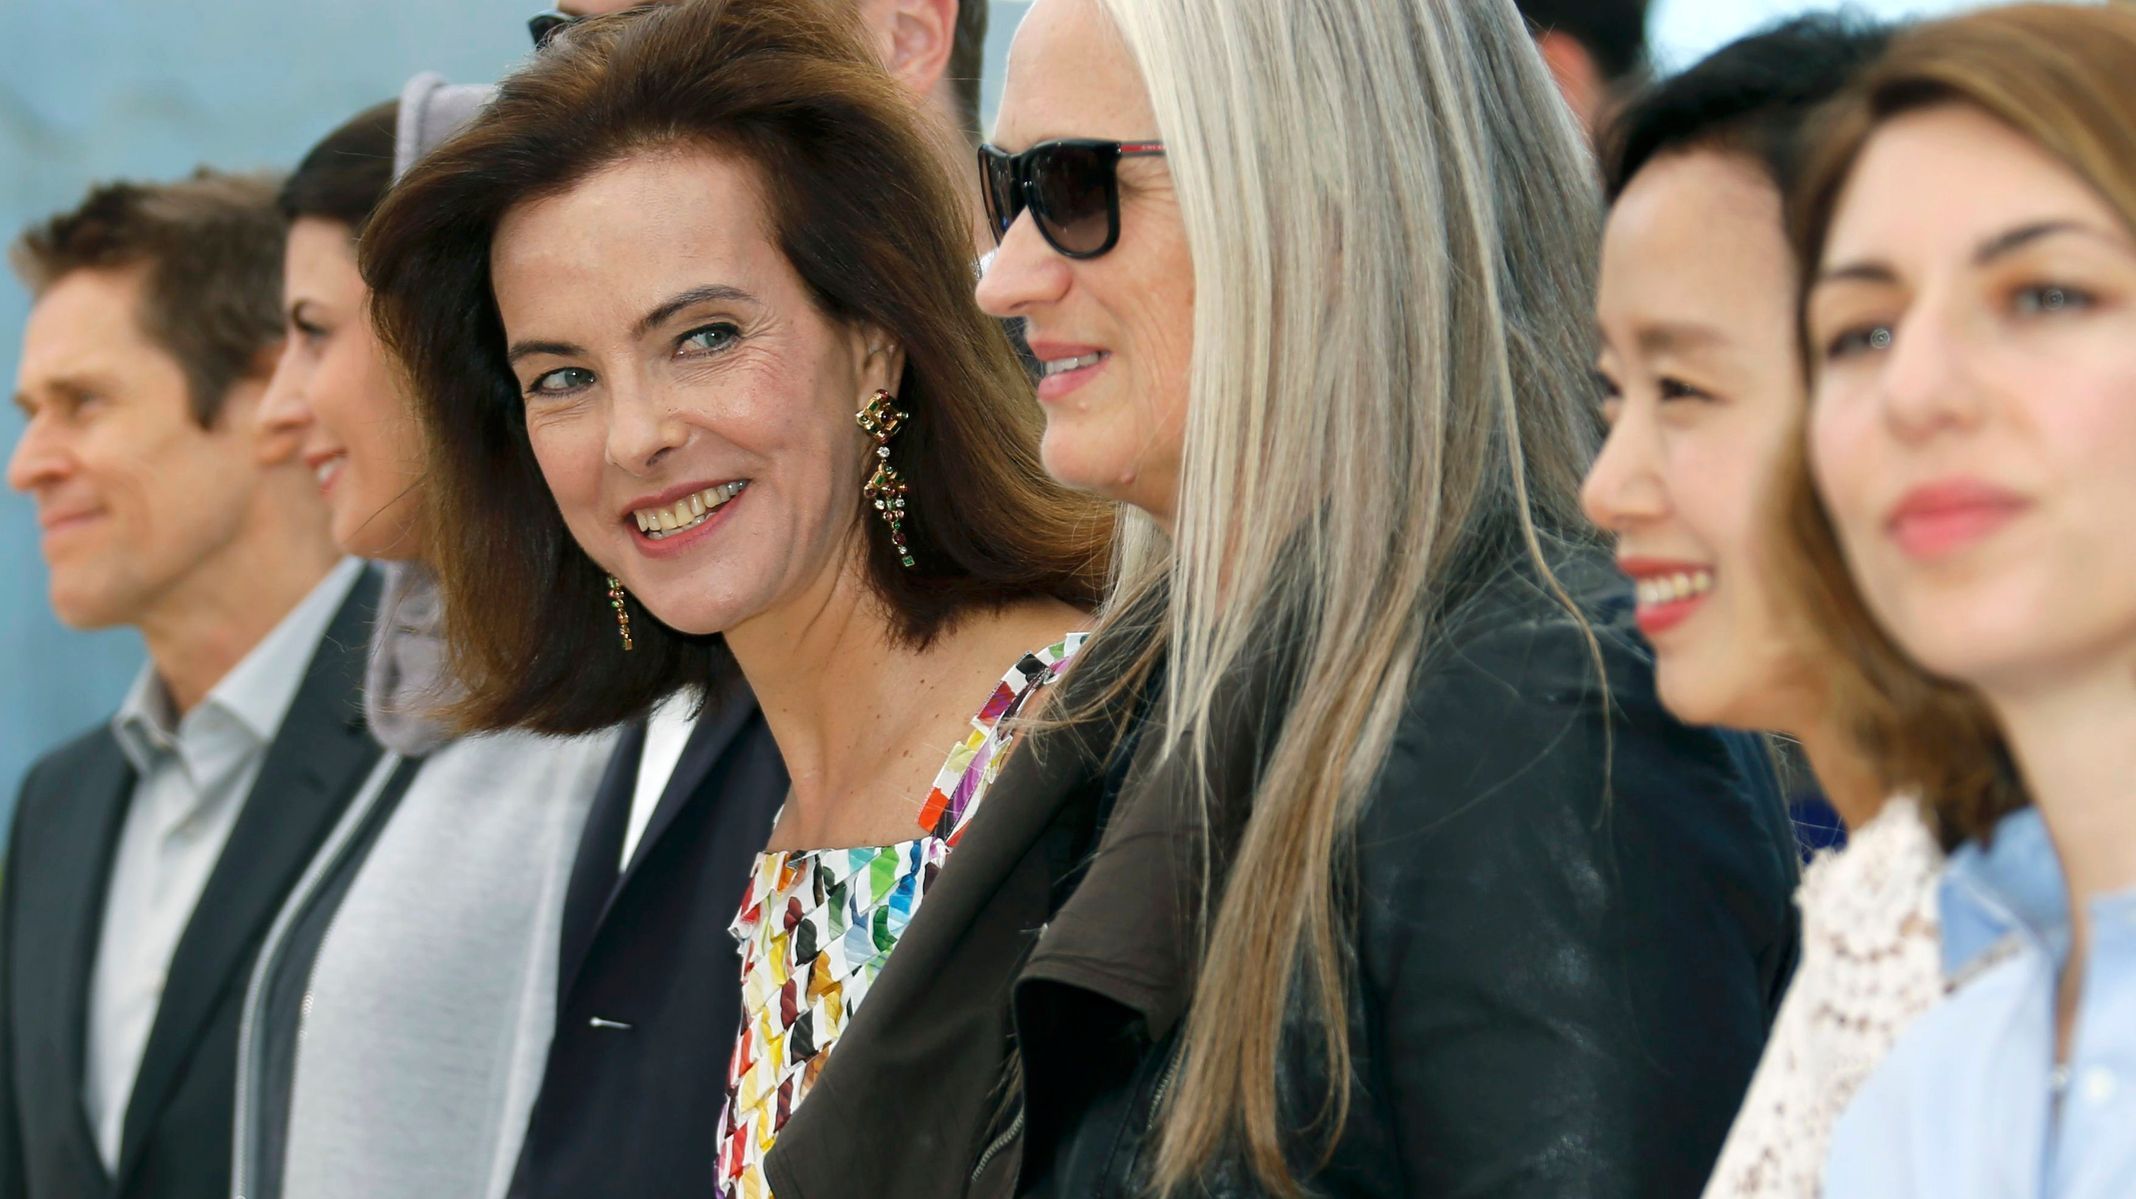 Jury President Jane Campion and jury members of the 67th Cannes Film Festival pose during a photocall before the opening of the Film Festival in Cannes